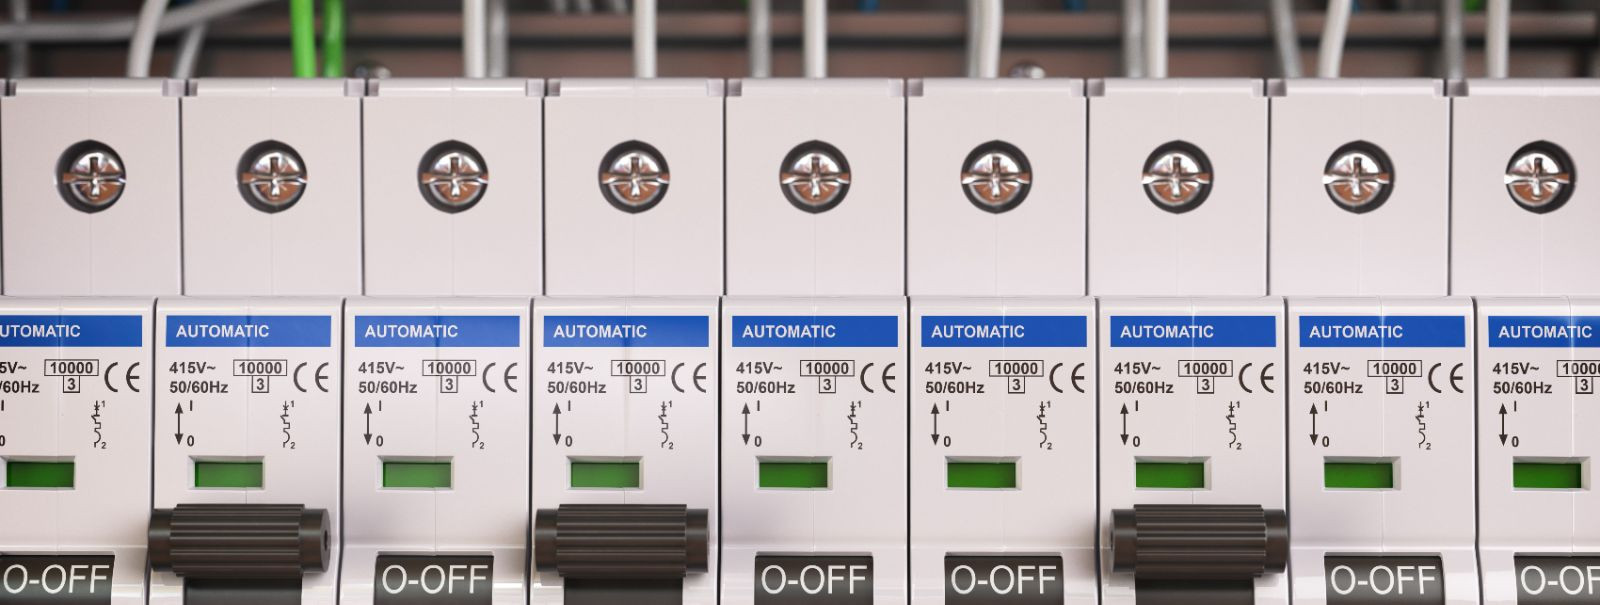 Circuit protection is a critical aspect of electrical safety, designed to automatically halt the flow of electricity in the event of a fault, overload, or short